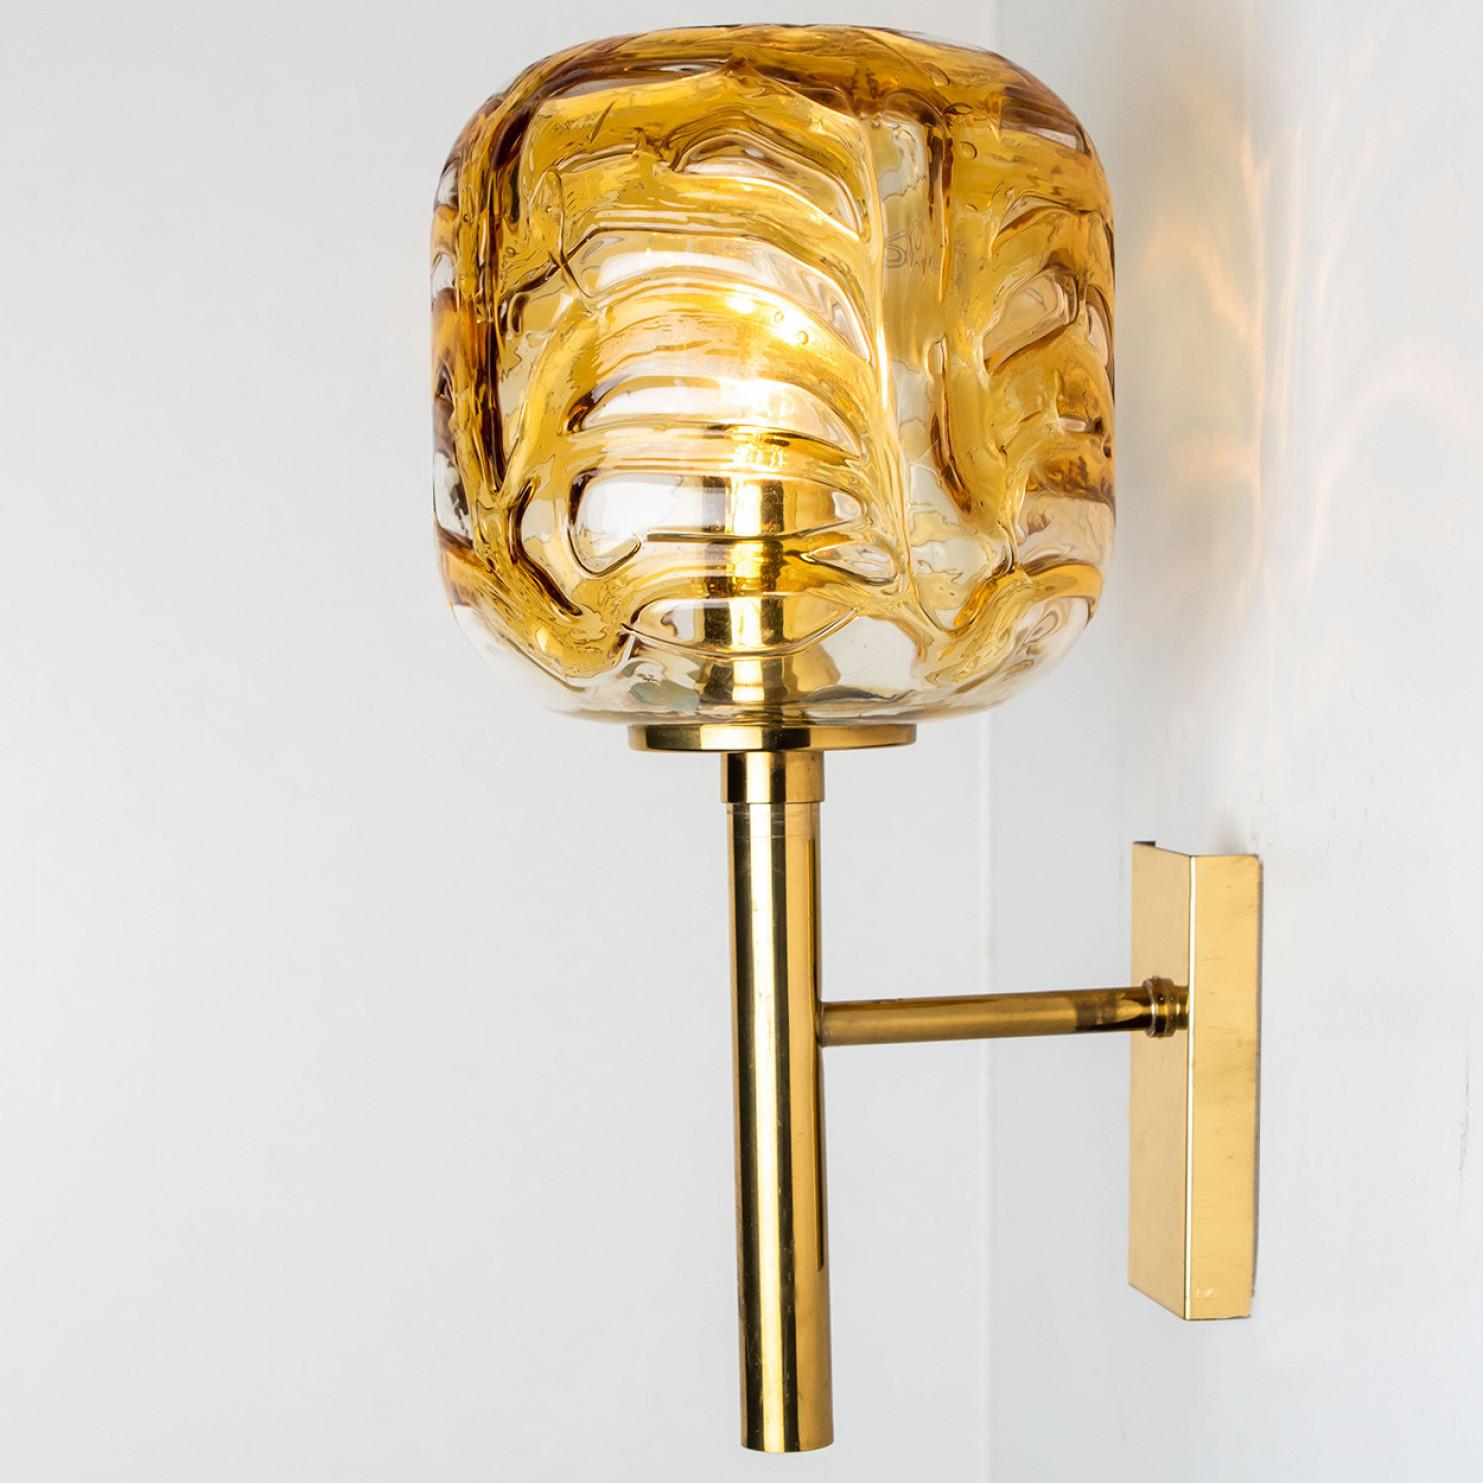 Pair of Murano Yellow Glass and Brass Wall Lights by Doria Leuchten, 1960s For Sale 2